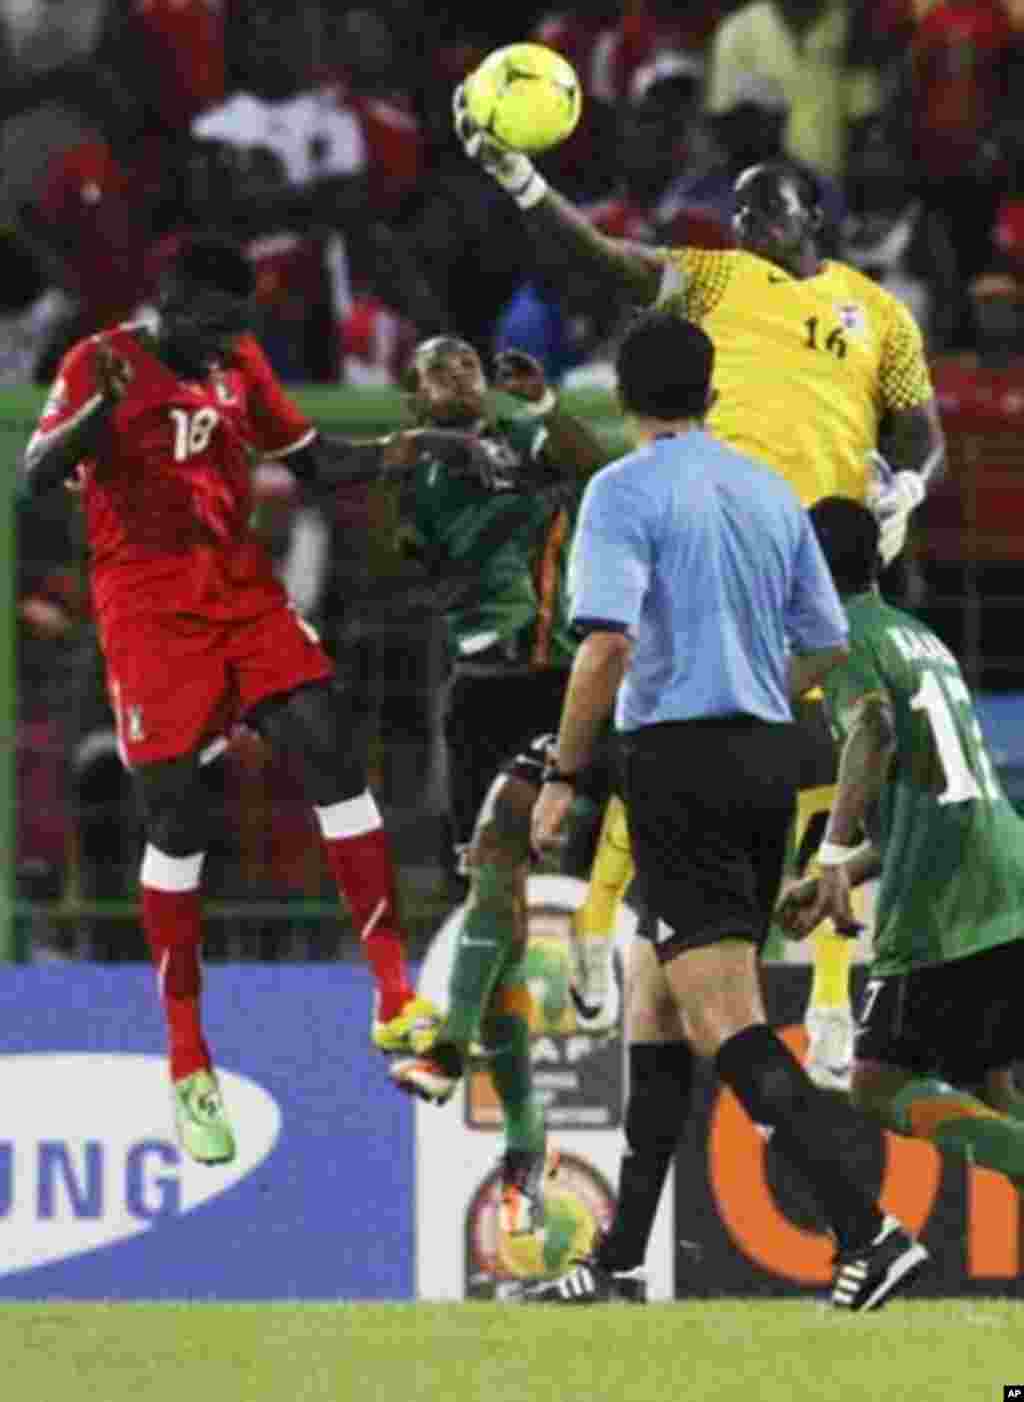 Zambia's goalkeeper Kennedy Mweene (R, top) stops the ball as Ellong Doualla (L) of Equatorial Guinea jumps to head during their African Nations Cup soccer match in Malabo January 29, 2012.